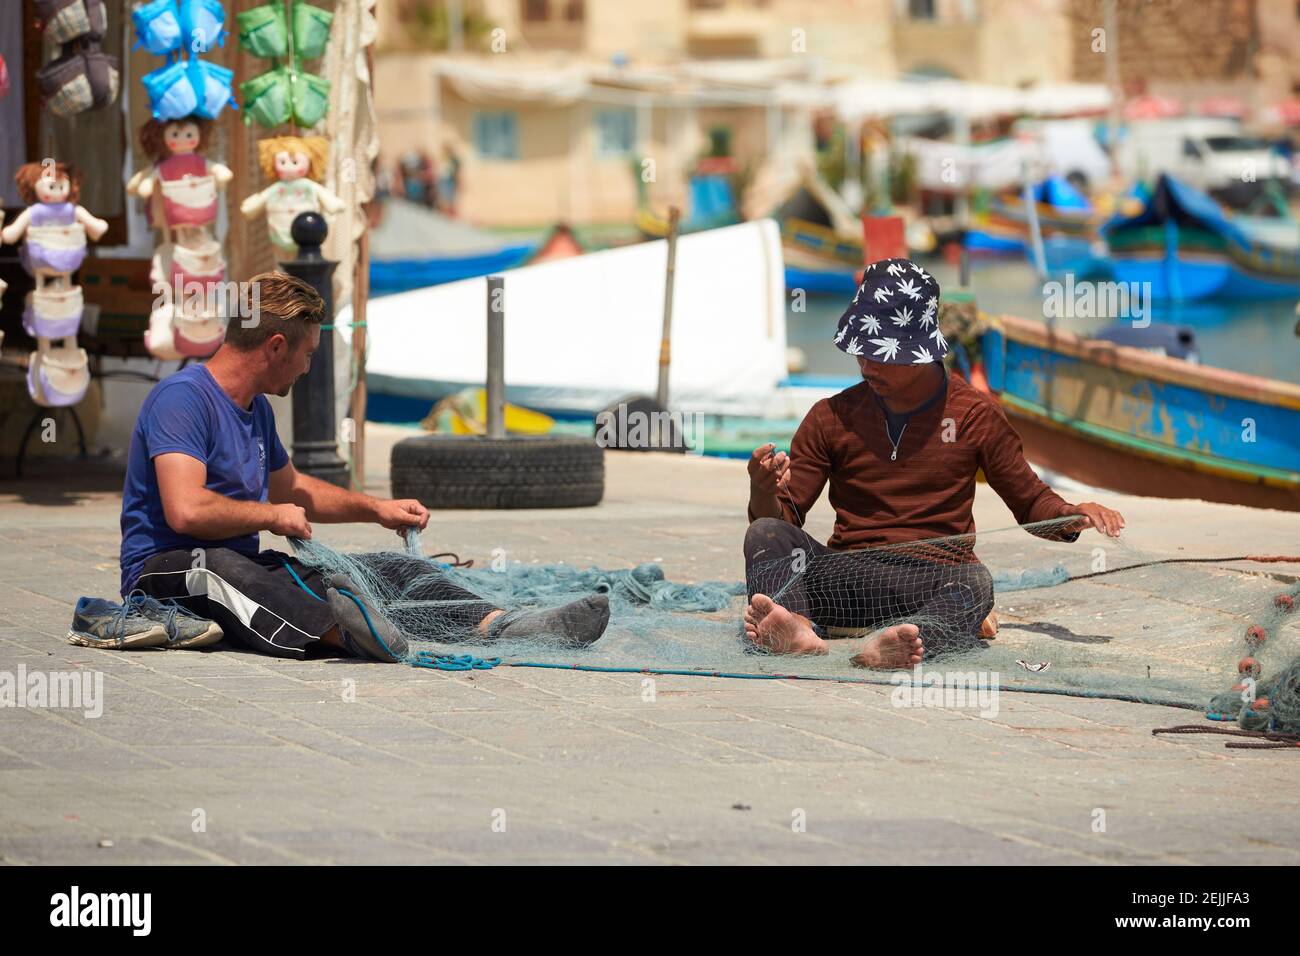 Fishermen repairing nets against a colored background. Scene from the streets of Valletta, Malta. Stock Photo